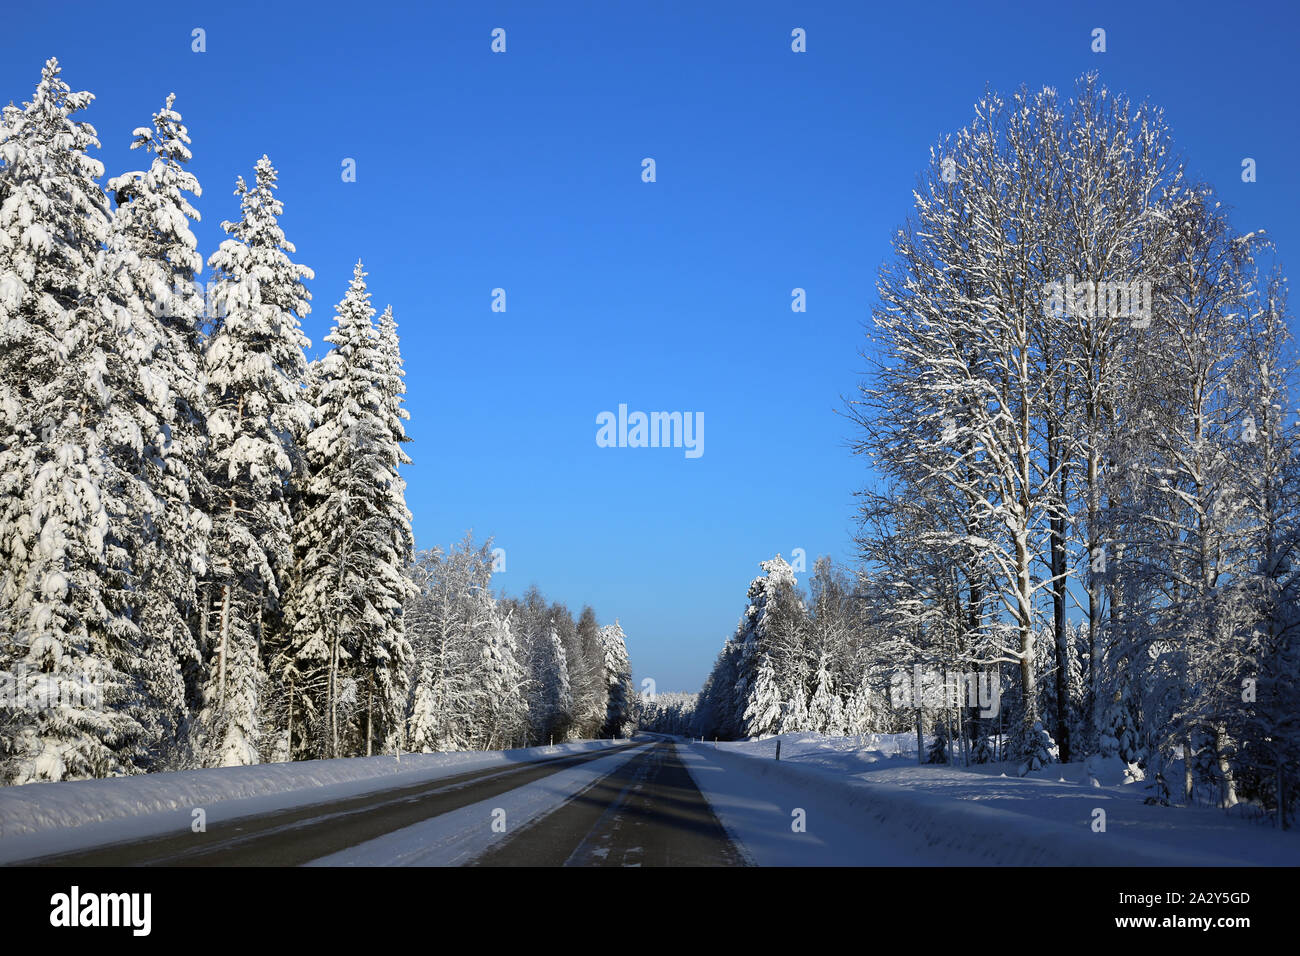 Driving in the winter wonderland called Finland during winter. In this photo you can see icy road and plenty of snow on ground and forest around it. Stock Photo